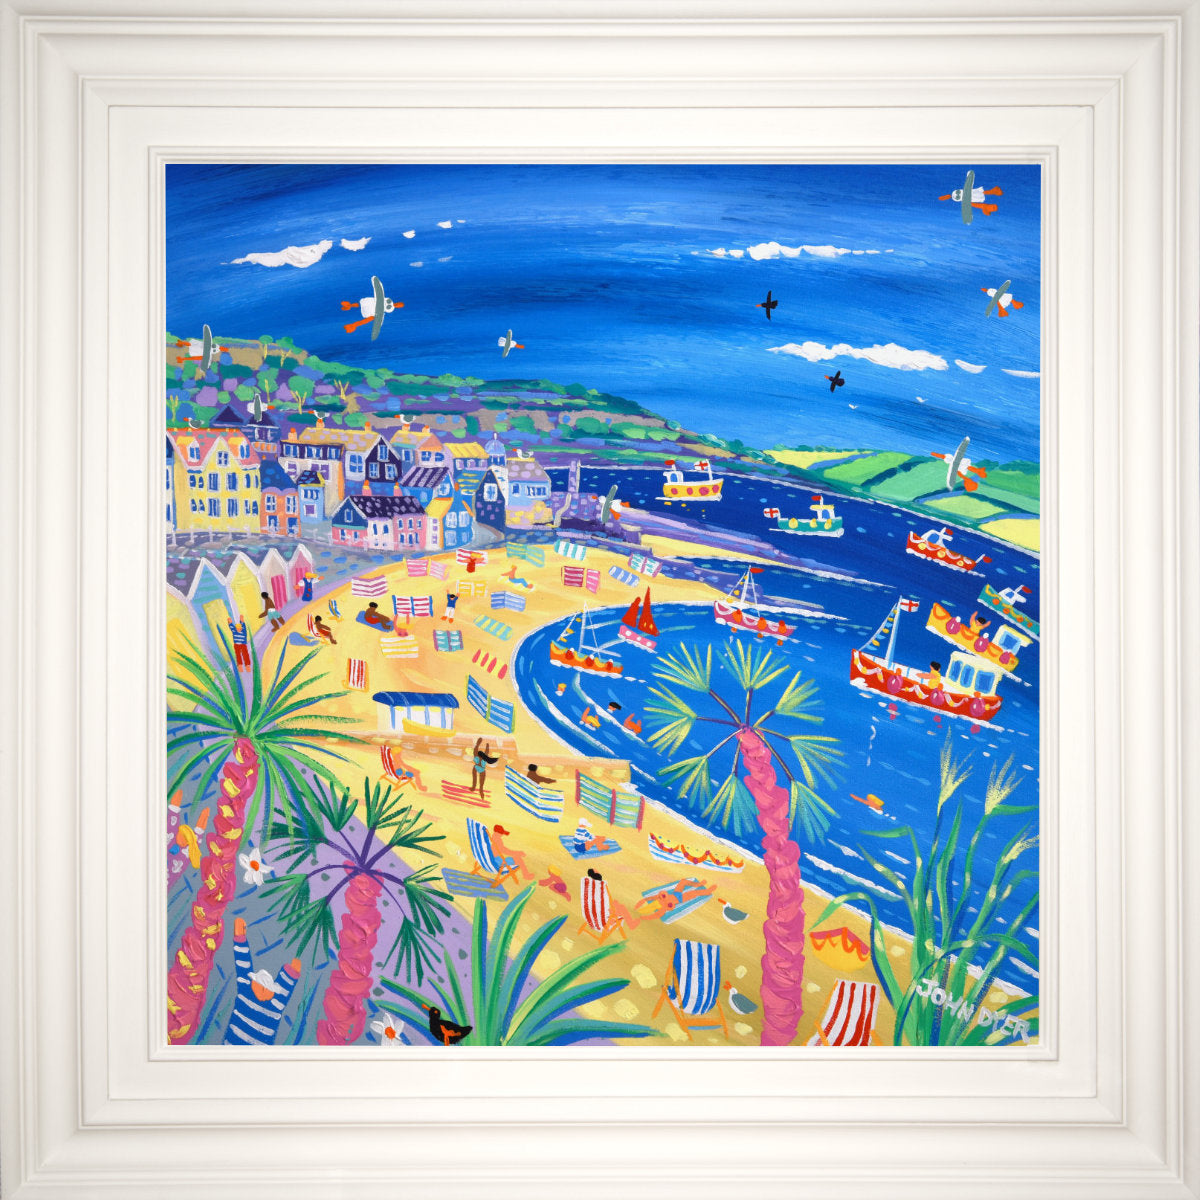 'Beach Huts and Boats, Lyme Regis', 24x24 inches acrylic on canvas. Dorset Painting by British Artist John Dyer.